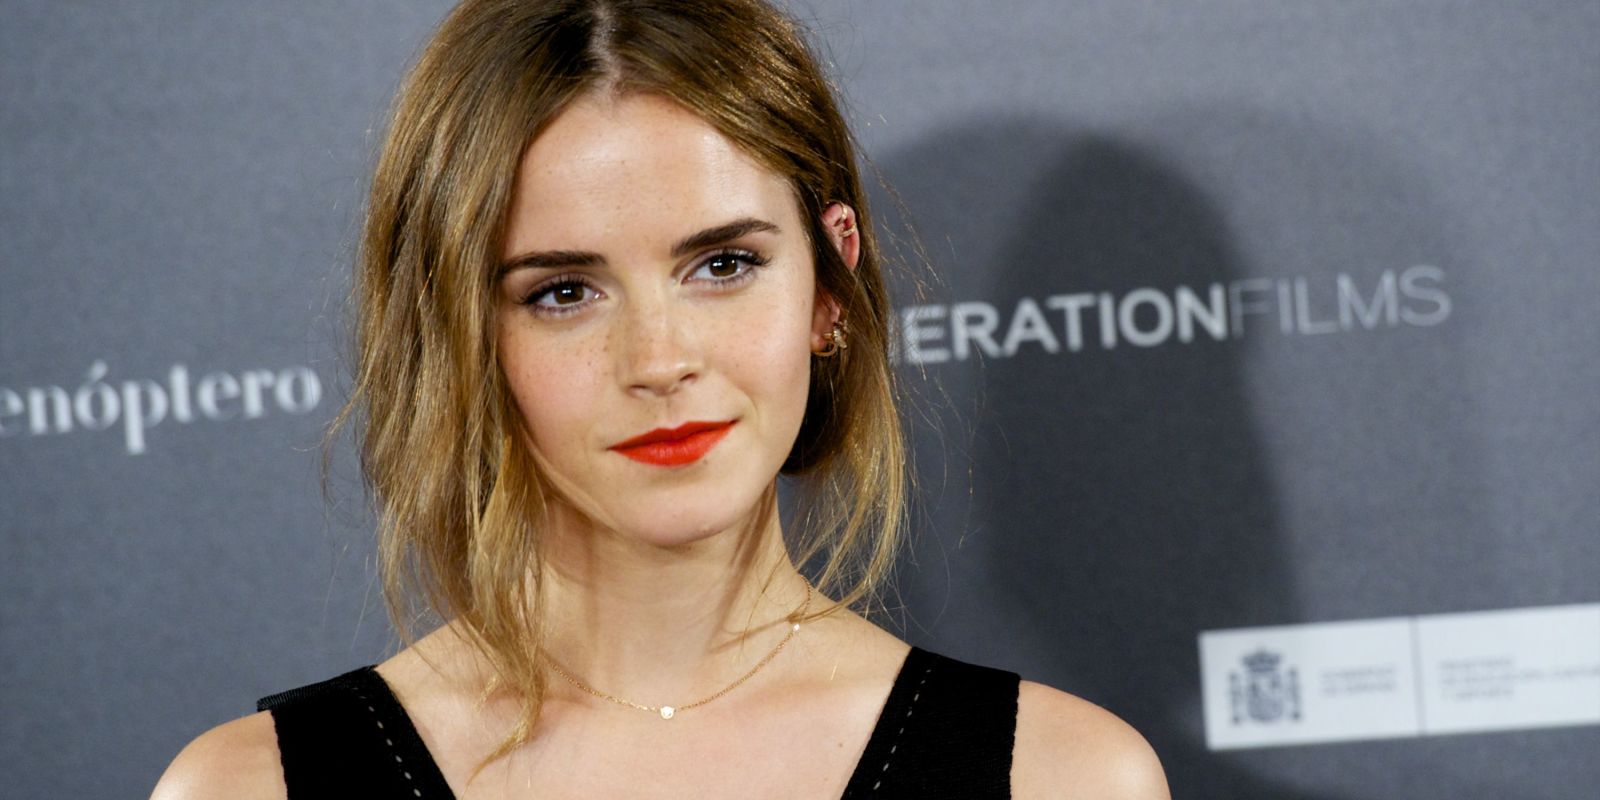 Fake nude videos of Emma Watson are being used to spread a 